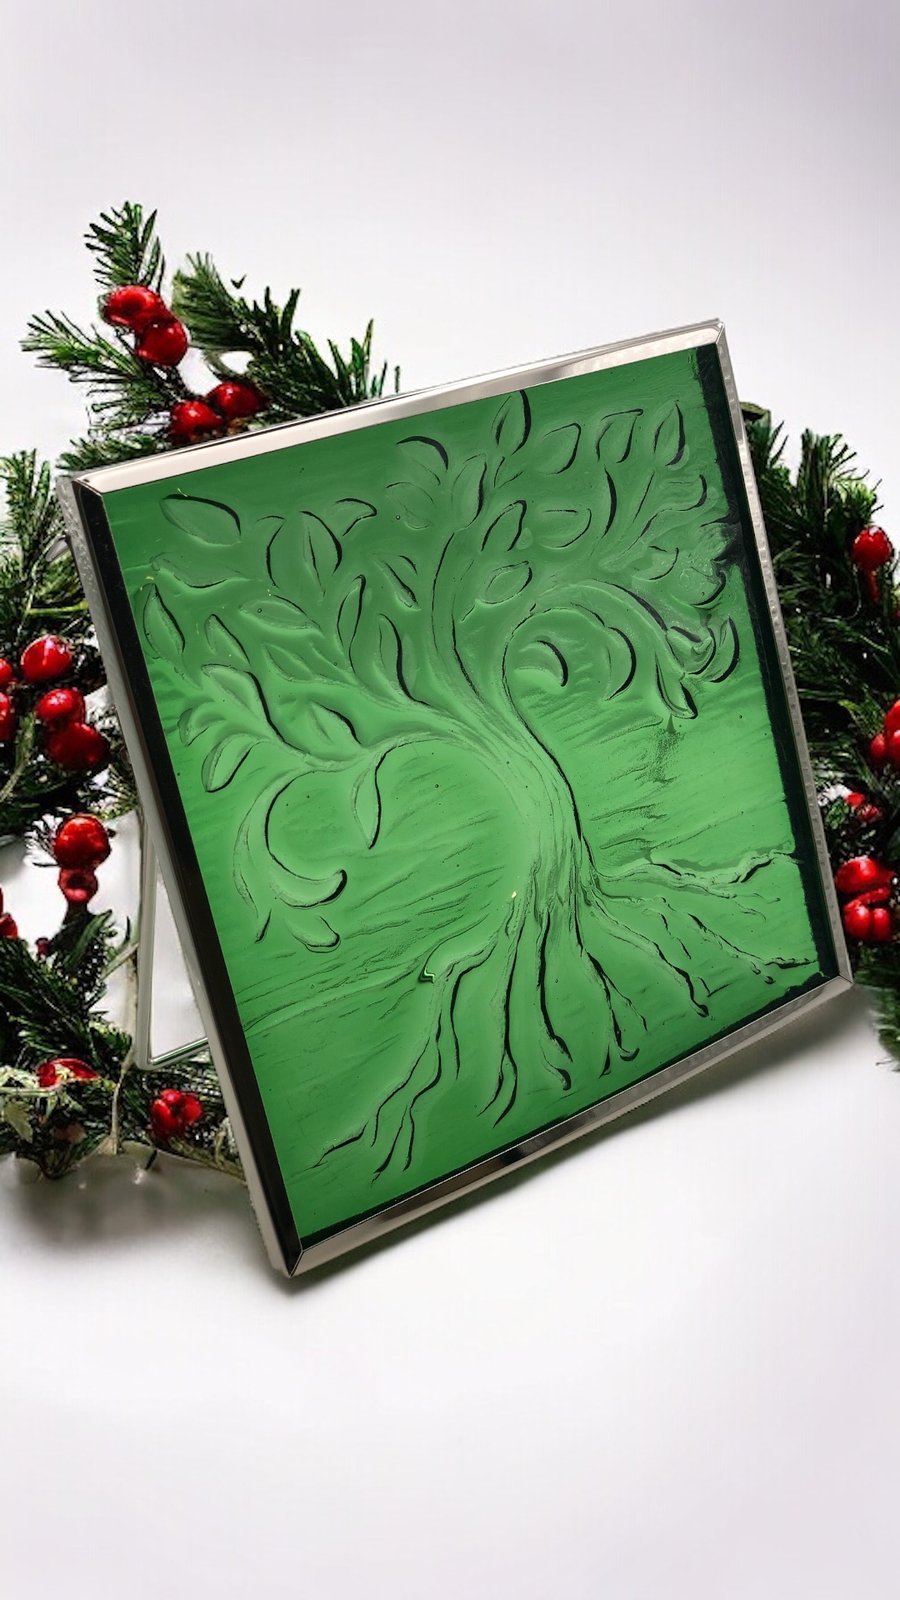 Tree of Life - fused glass tile in hanging or standing frame